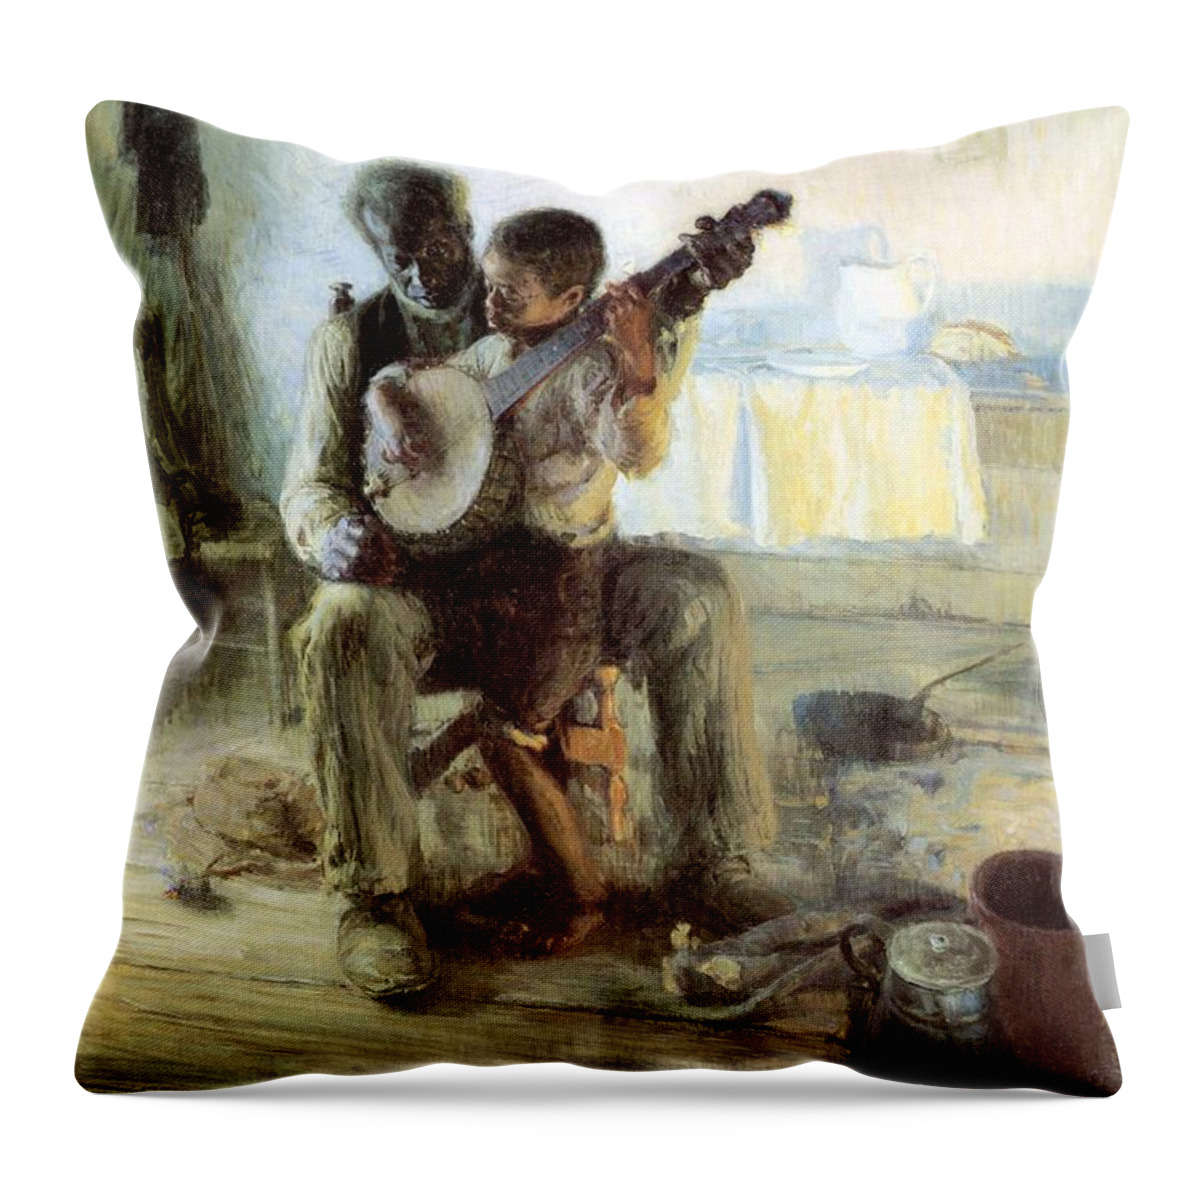 Black Art For Sale Throw Pillow featuring the painting The Banjo Lesson by Henry Ossawa Tanner